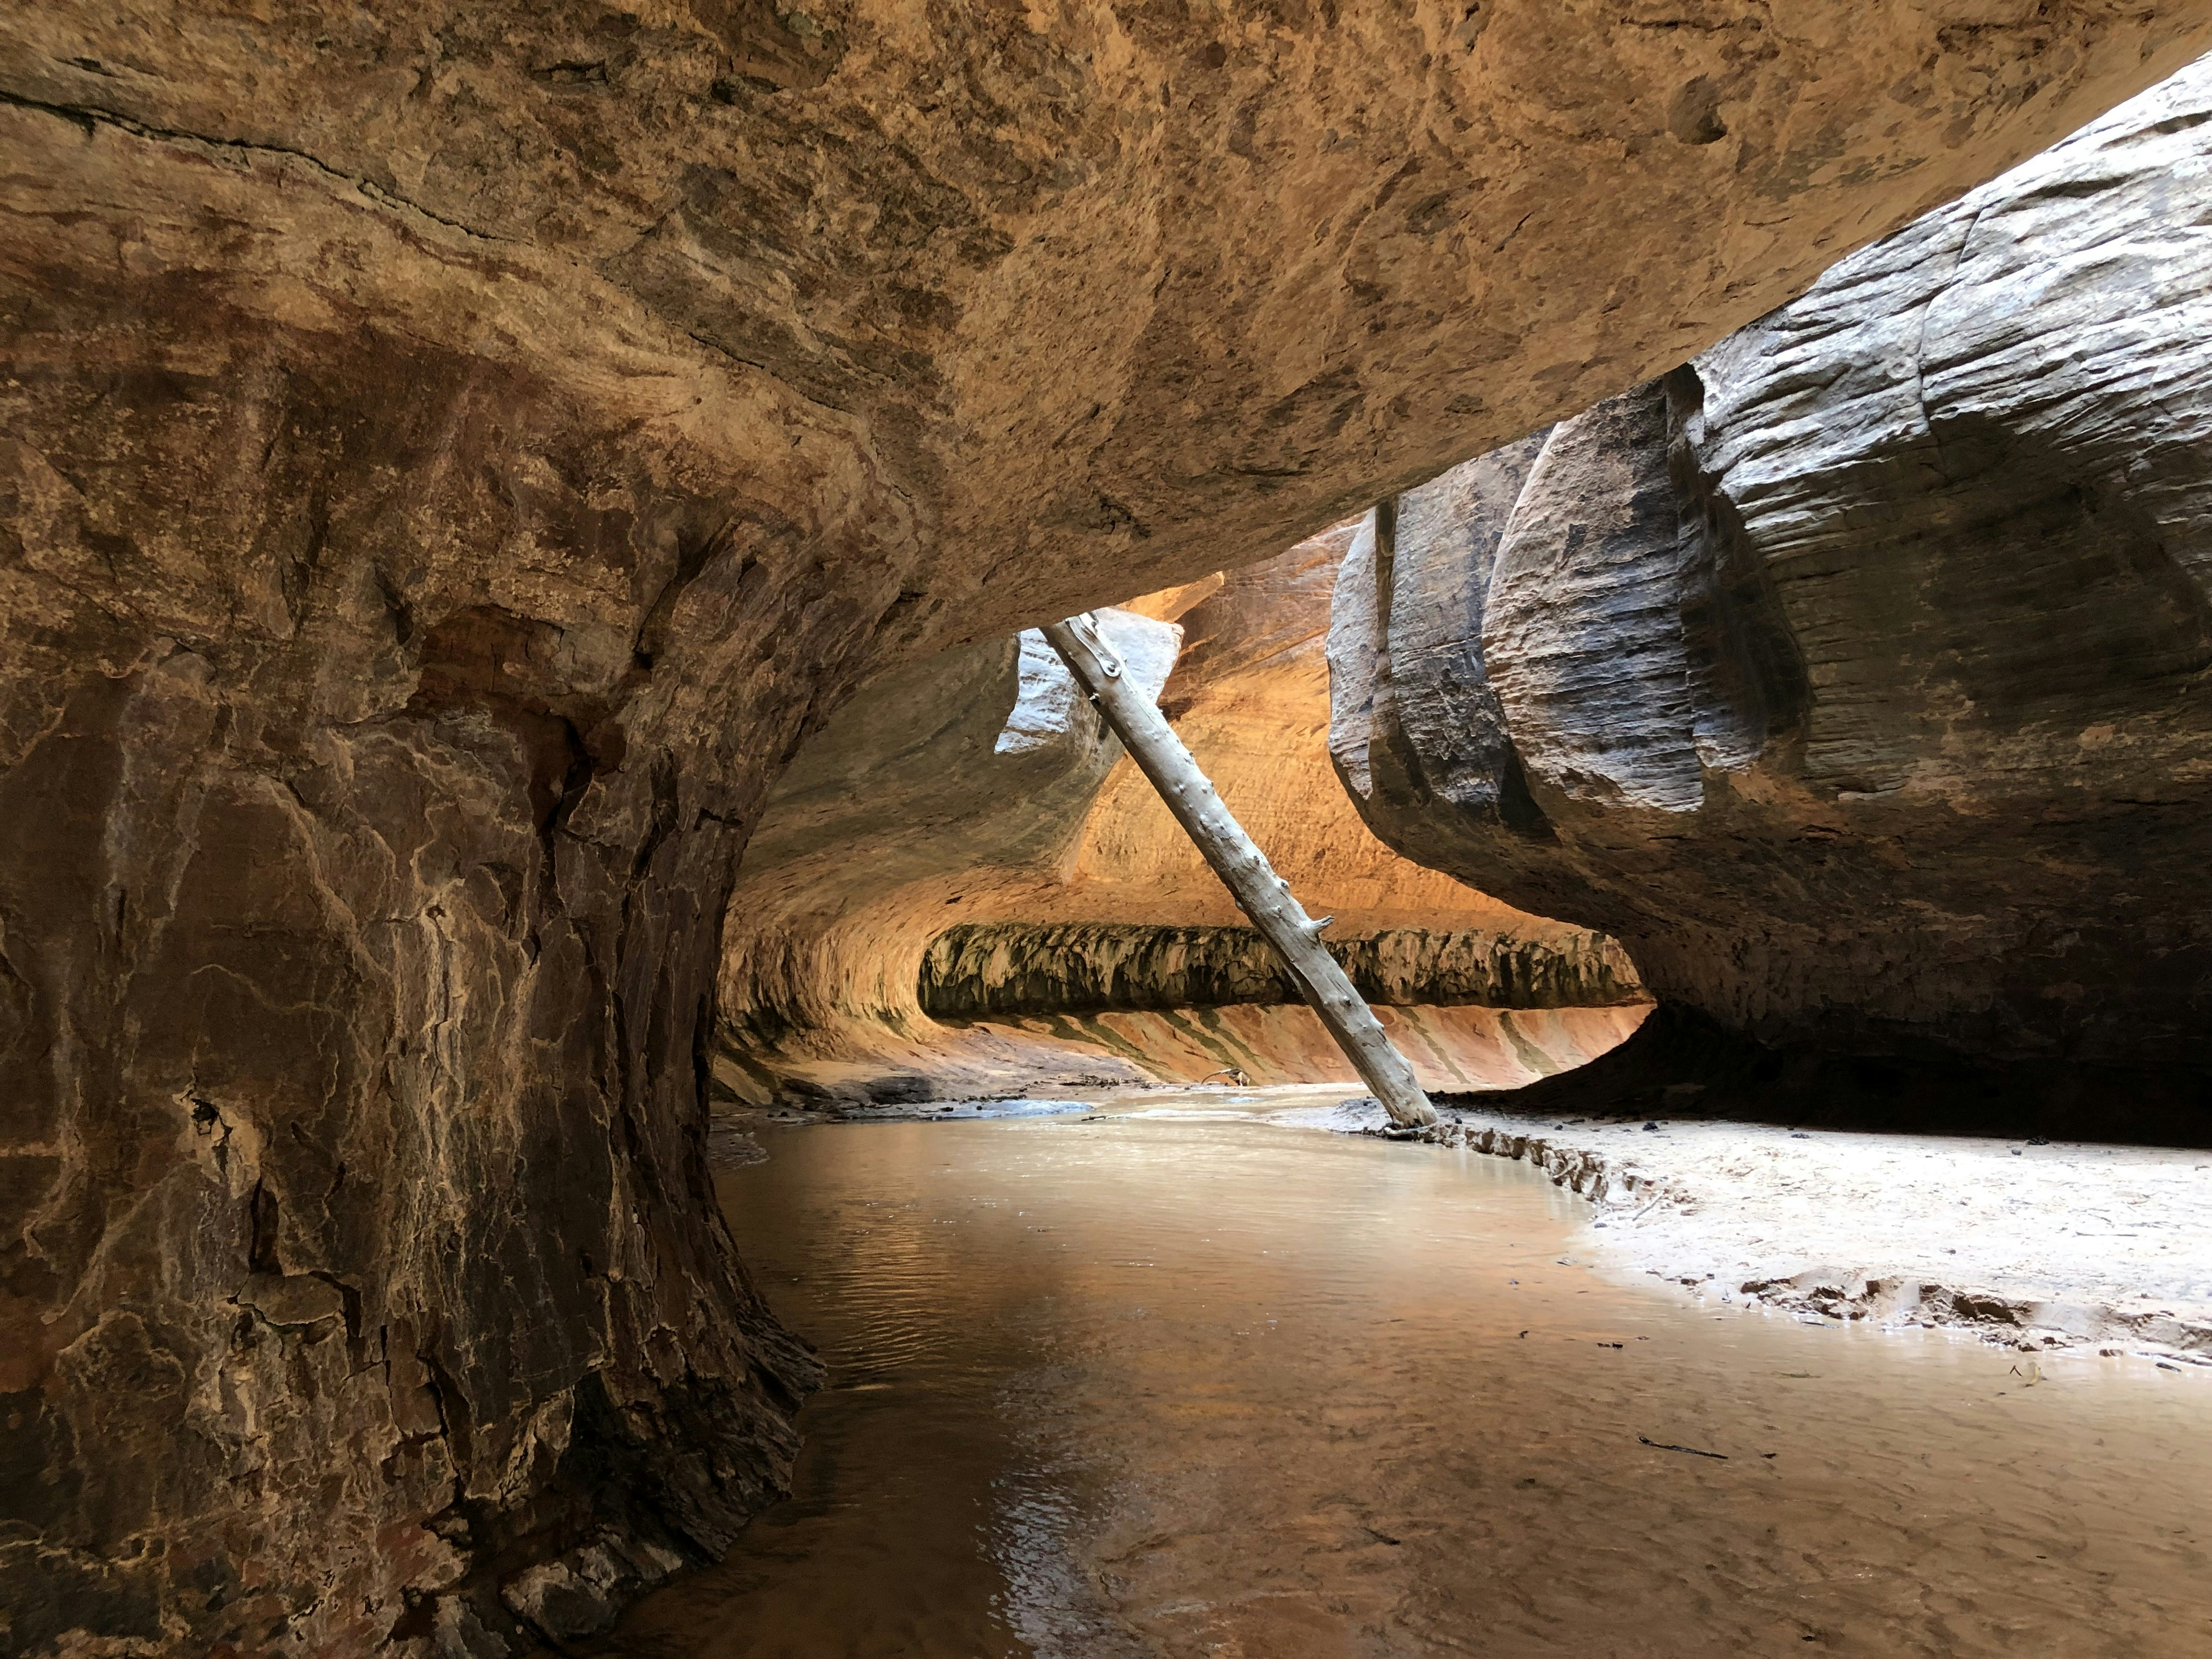 Upper section of the Subway in Zion National Park. A playground of color, rock, water, and the erosive powers at play.